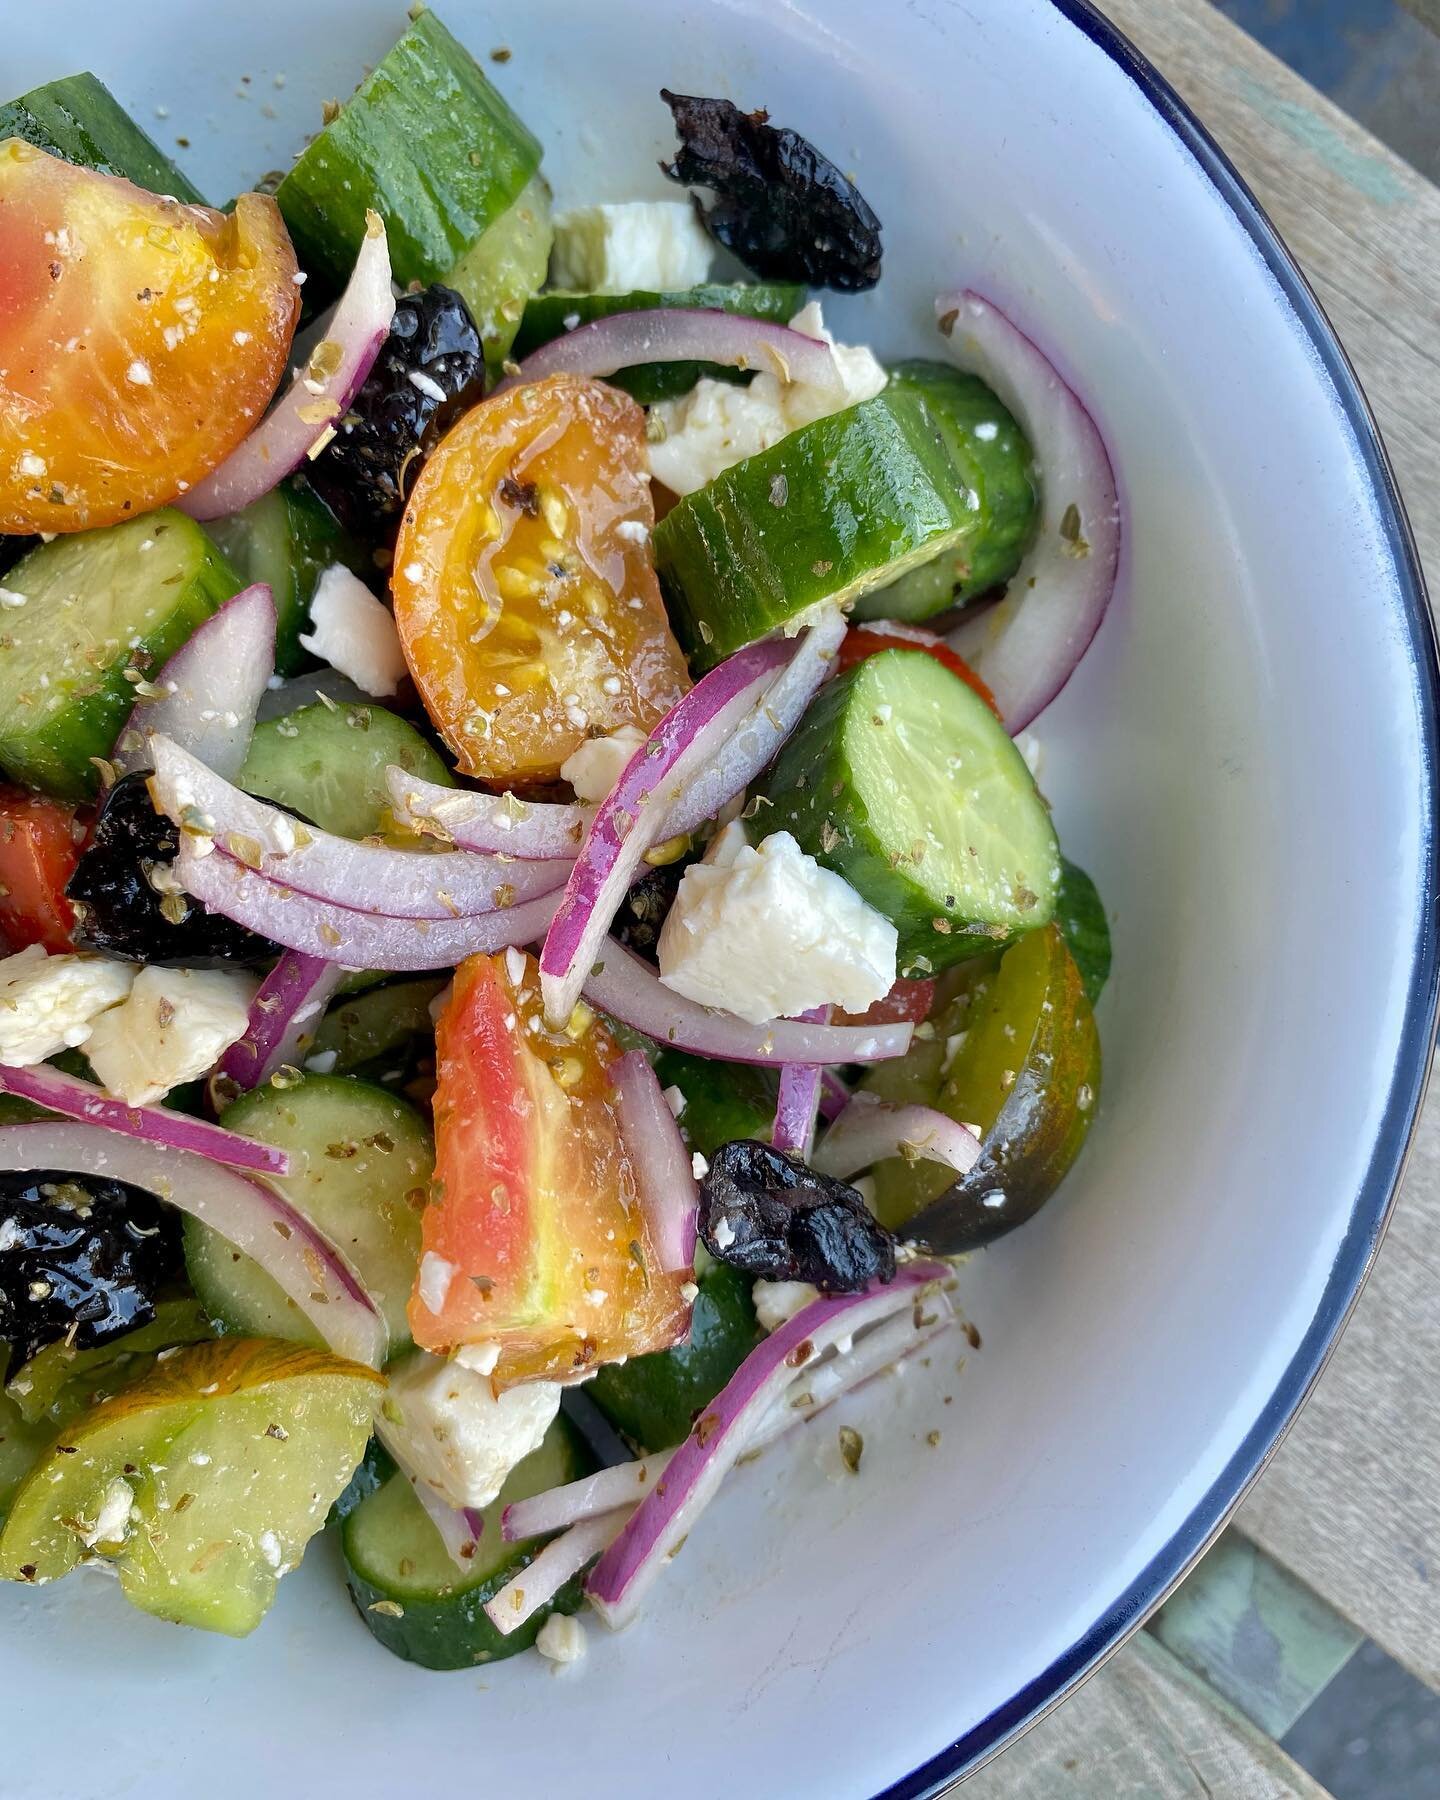 Kalionzes Greek salad now on the menu! 

&bull; Persian cucumbers, red onion, heirloom tomatoes, oil cured black olives, feta cheese, olive oil, rice vinegar + oregano &bull;